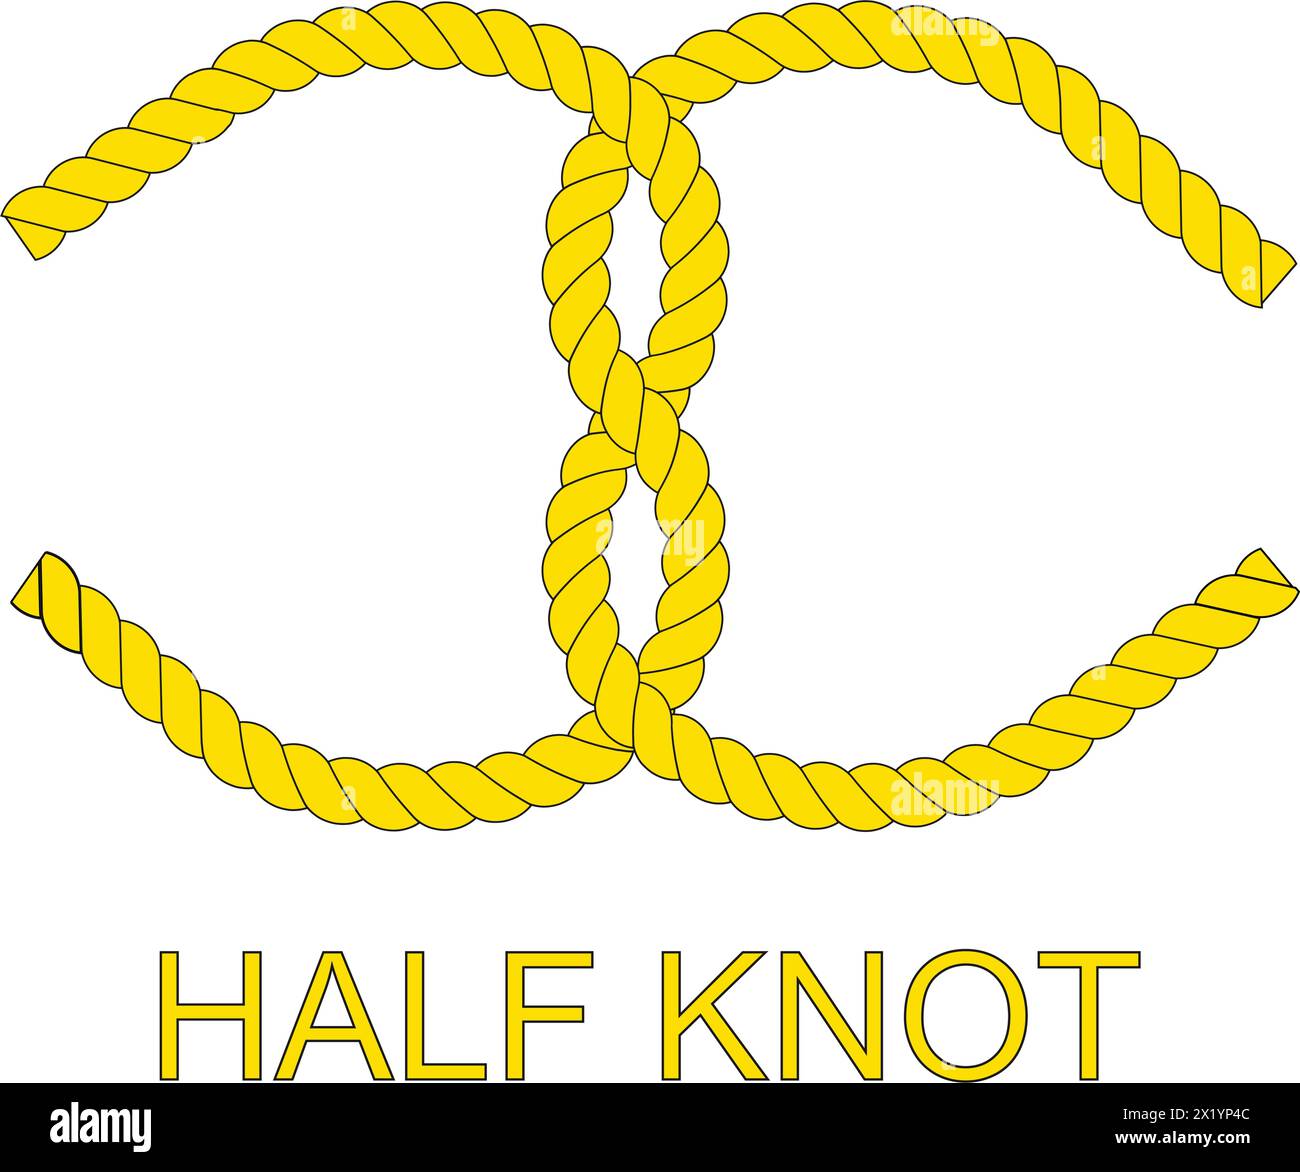 knotted rope icon with rope vector illustration design Stock Vector